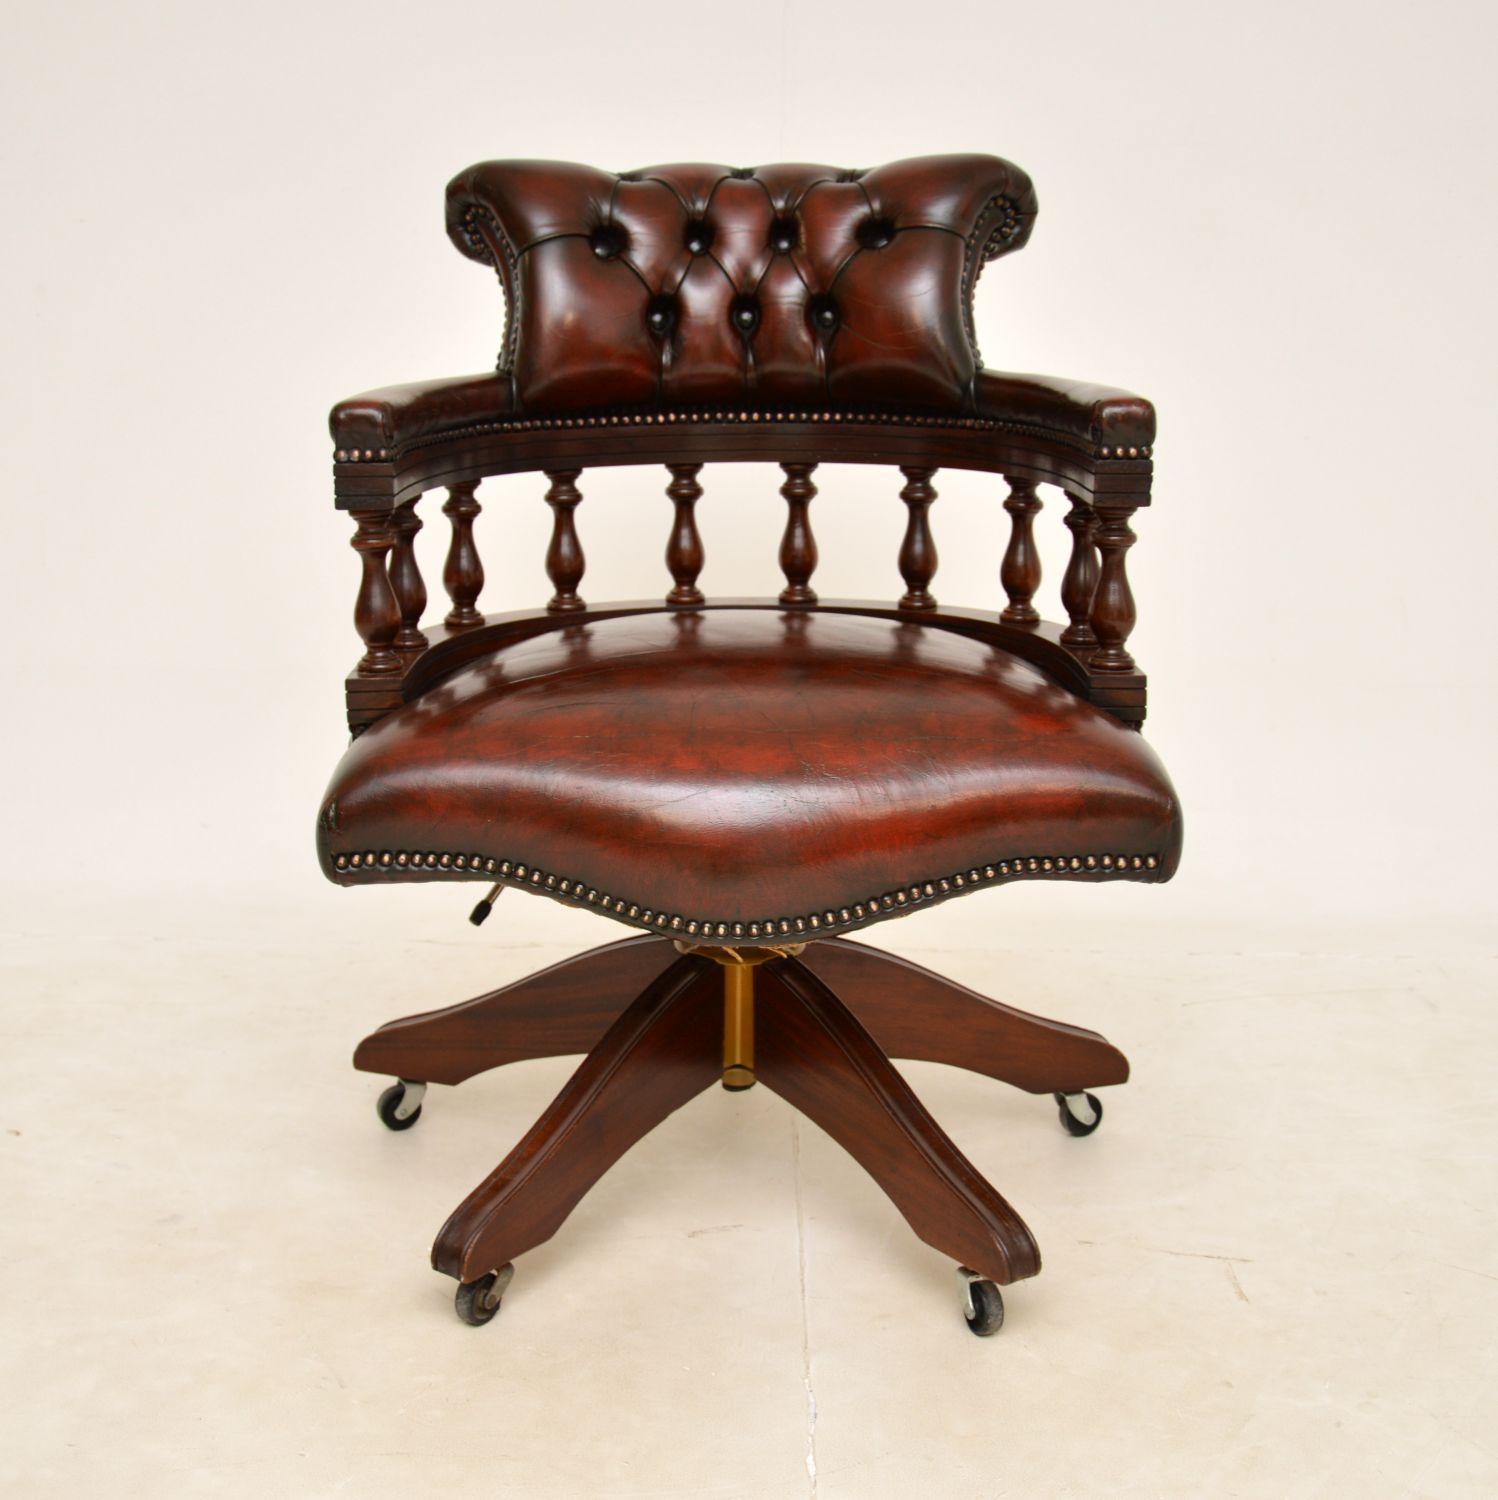 A smart and very comfortable antique Victorian style desk chair. This was made in England, it dates from around the 1960’s.

It is of superb quality and is very comfortable. It swivels smoothly, rolls on casters and the height can be